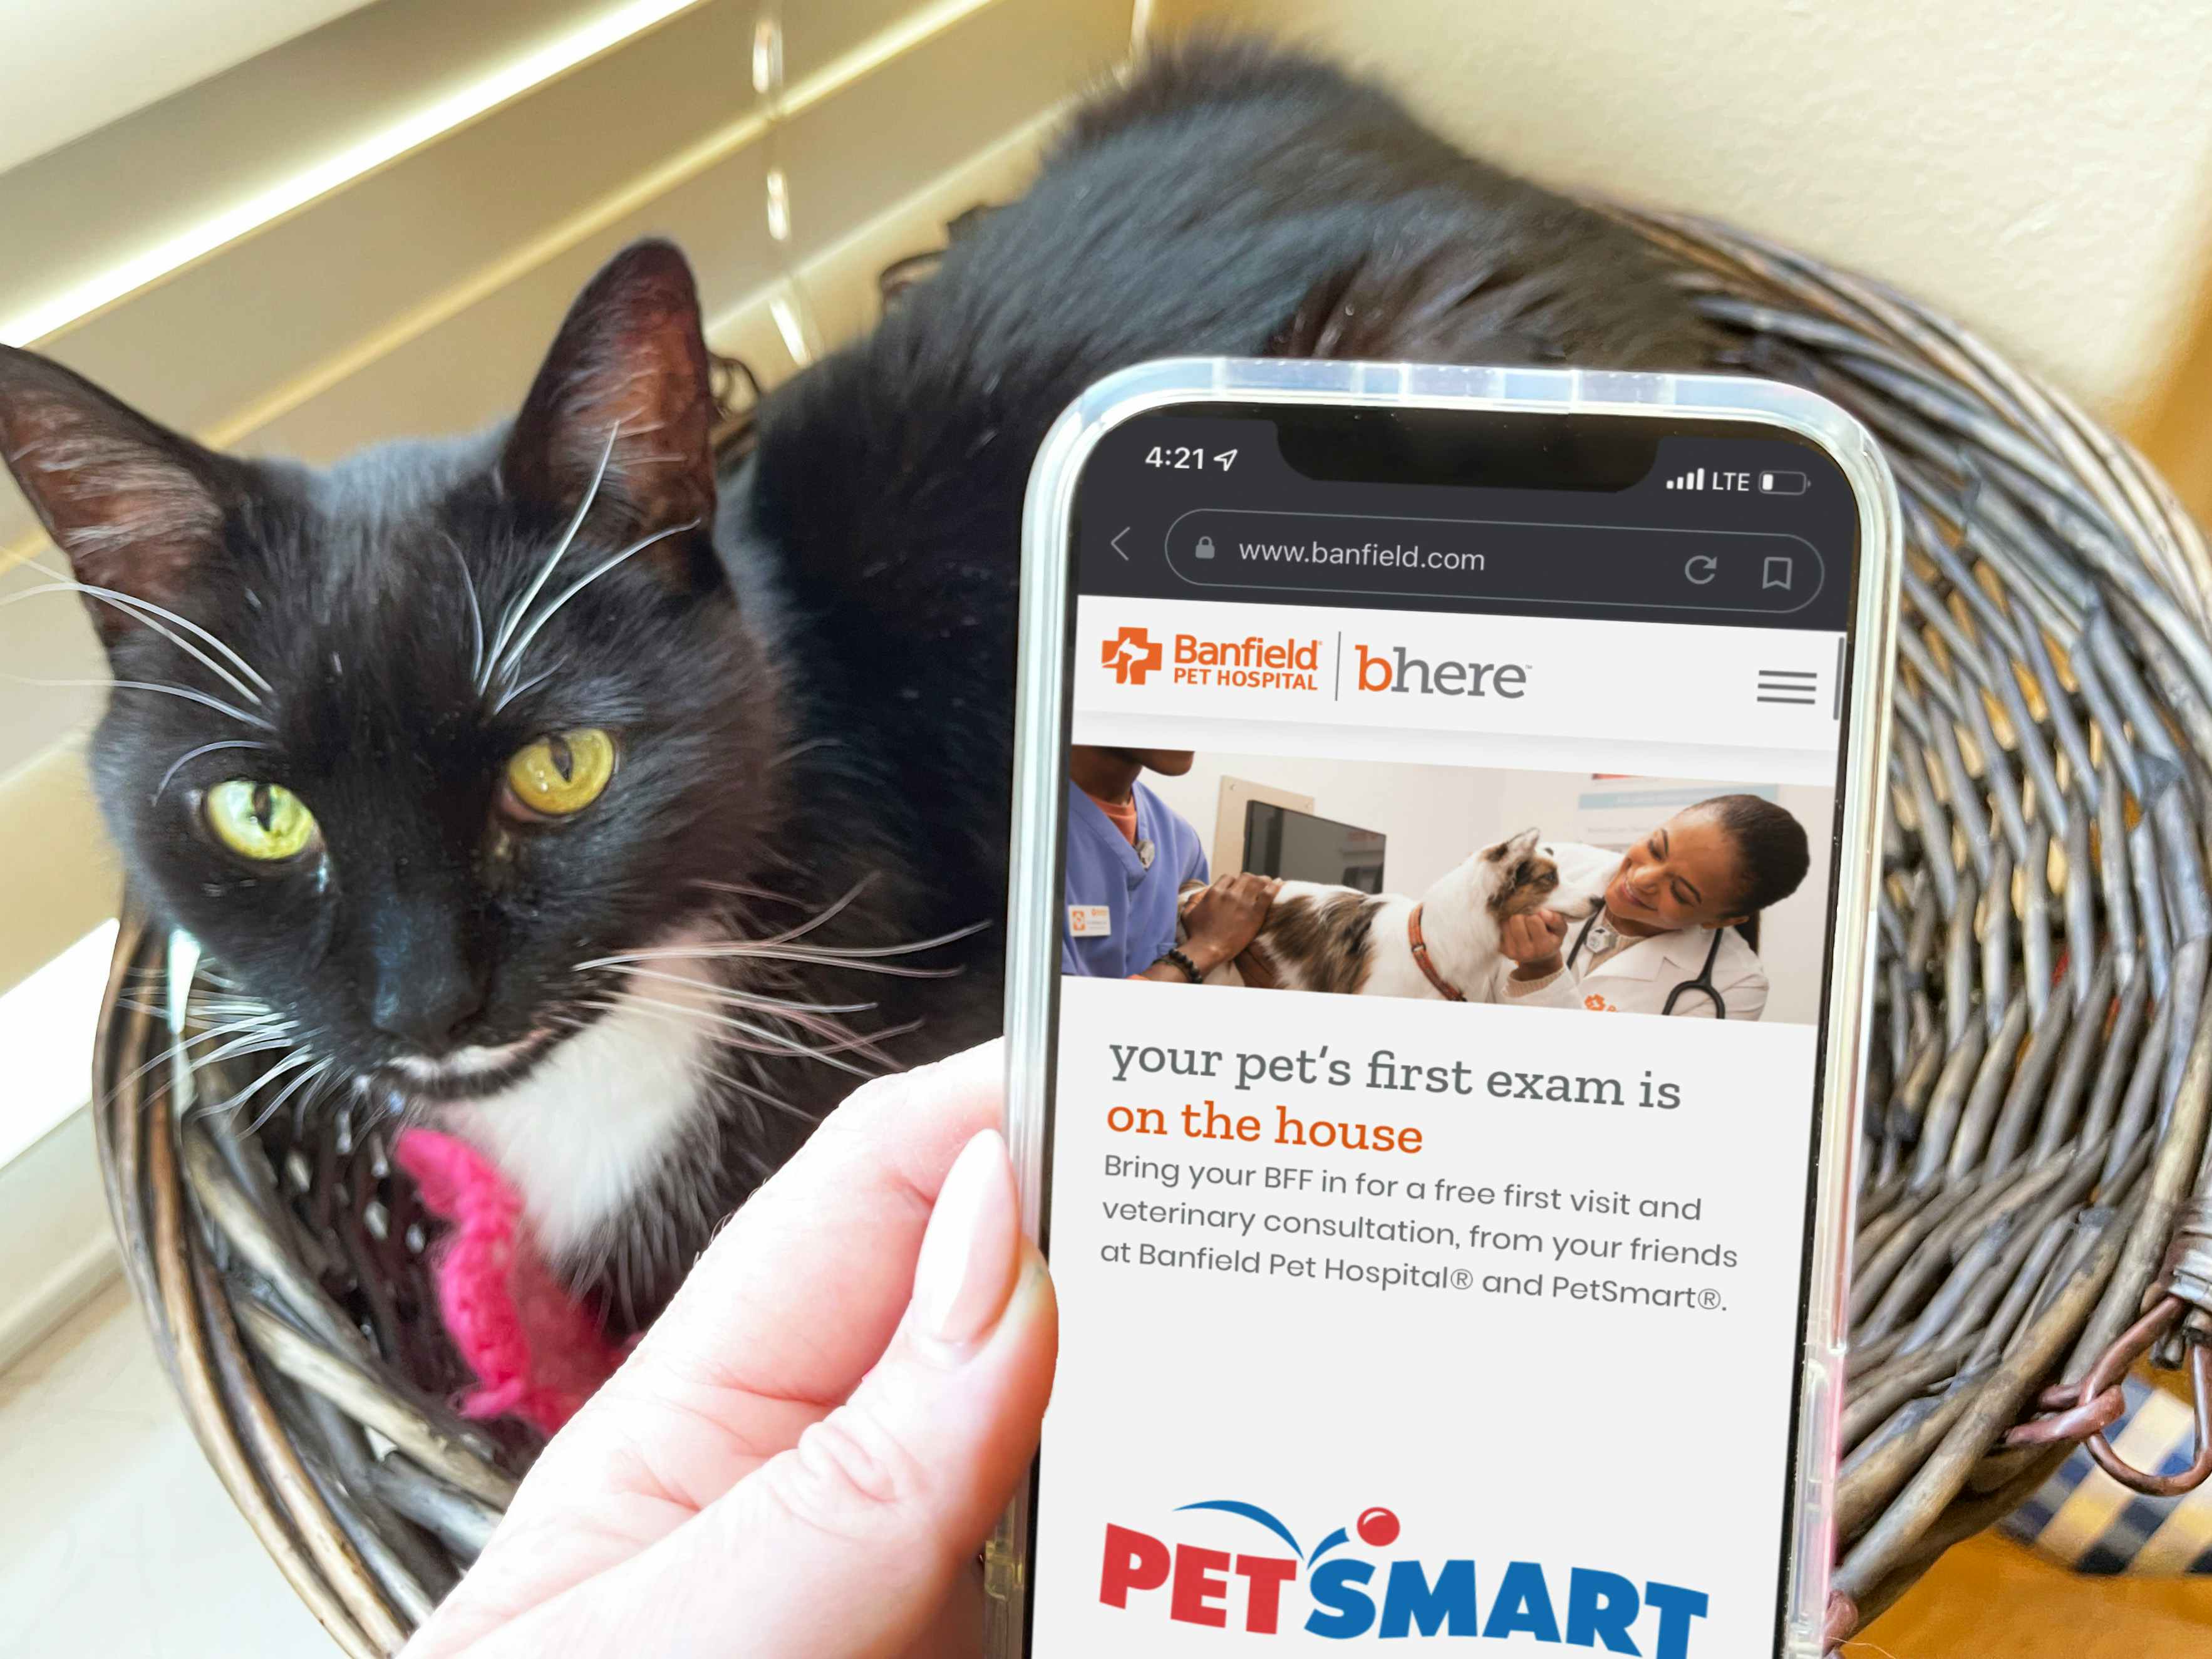 A cellphone displaying the PetSmart website's page about Banfield Pet Hospital's free vet clinic exam being held in front of cat lying in...